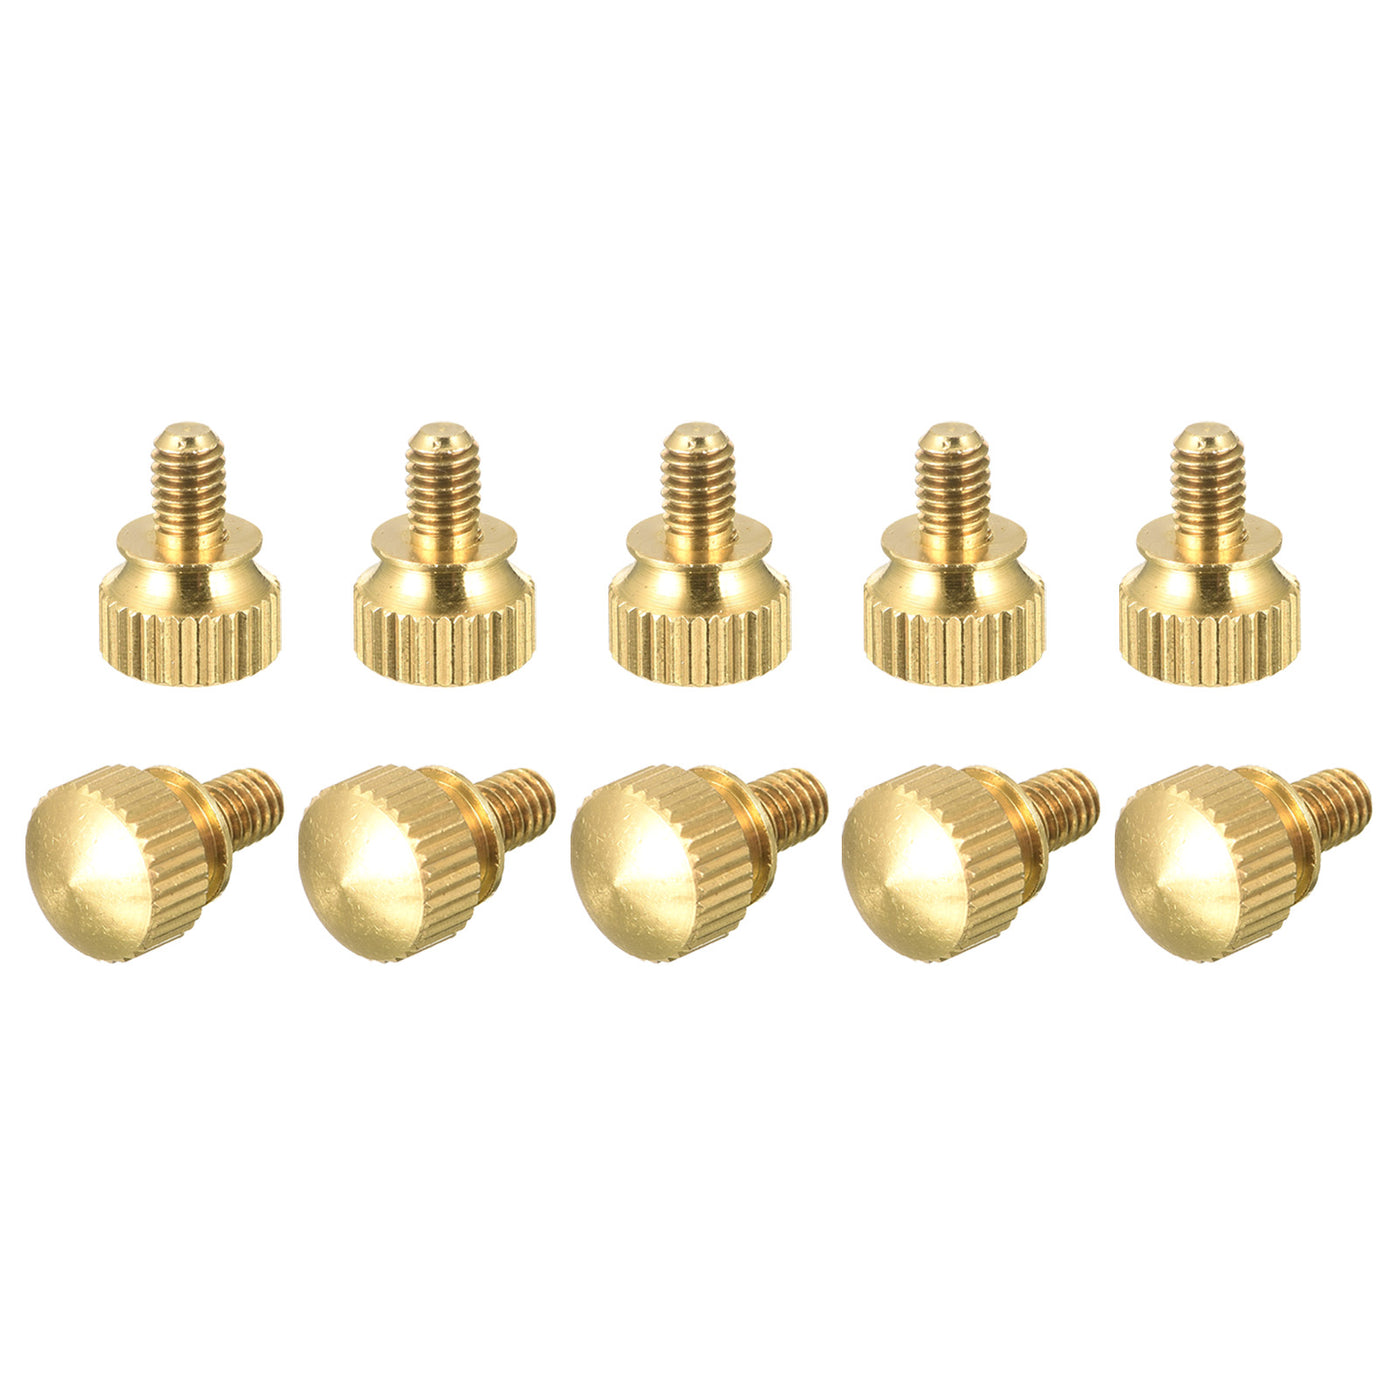 uxcell Uxcell 10Pcs Knurled Thumb Screws, M4x6mm Brass Shoulder Bolts Stepped Grip Knobs Fasteners for PC, Electronic, Mechanical